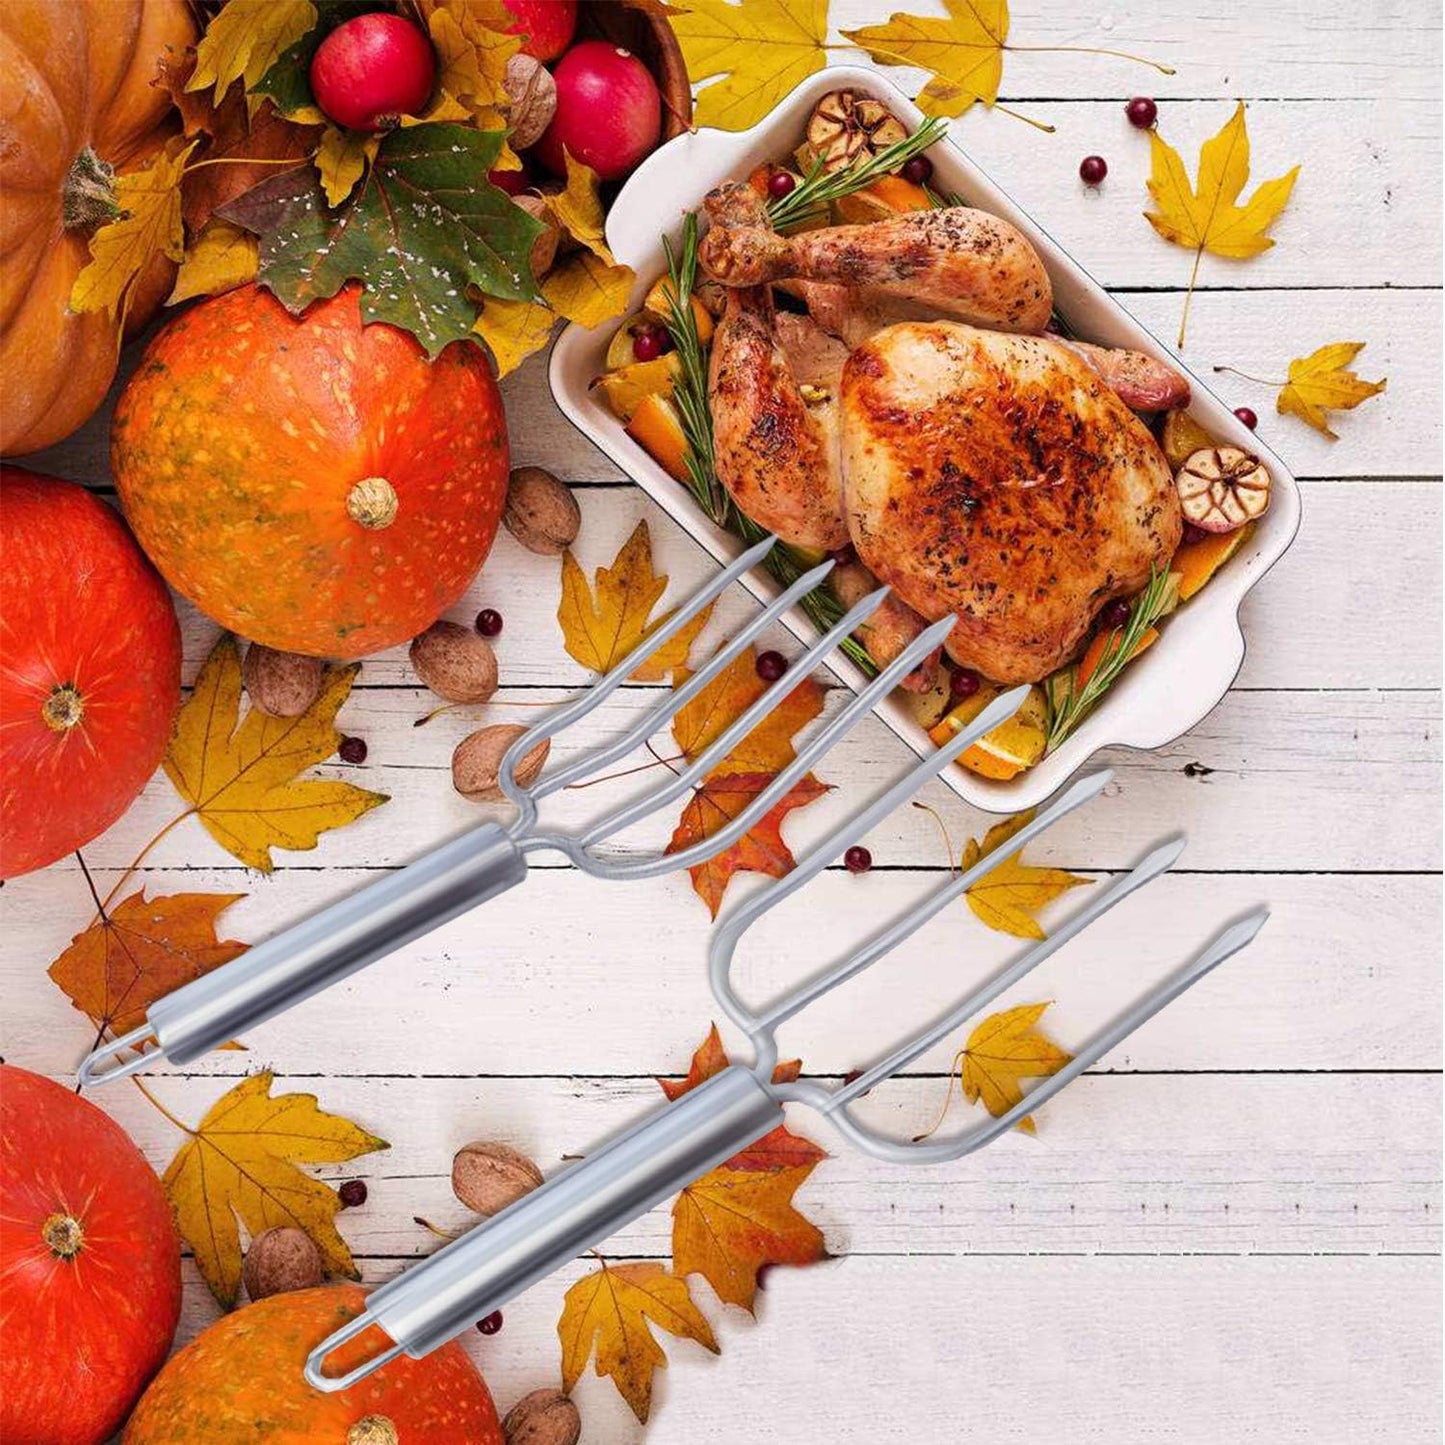 Stainless Steel Turkey Baster and Poultry Lifters Fork Set of 2. Food Grade Stainless Steel and Bpa-Free Silicone. Dishwasher-Safe